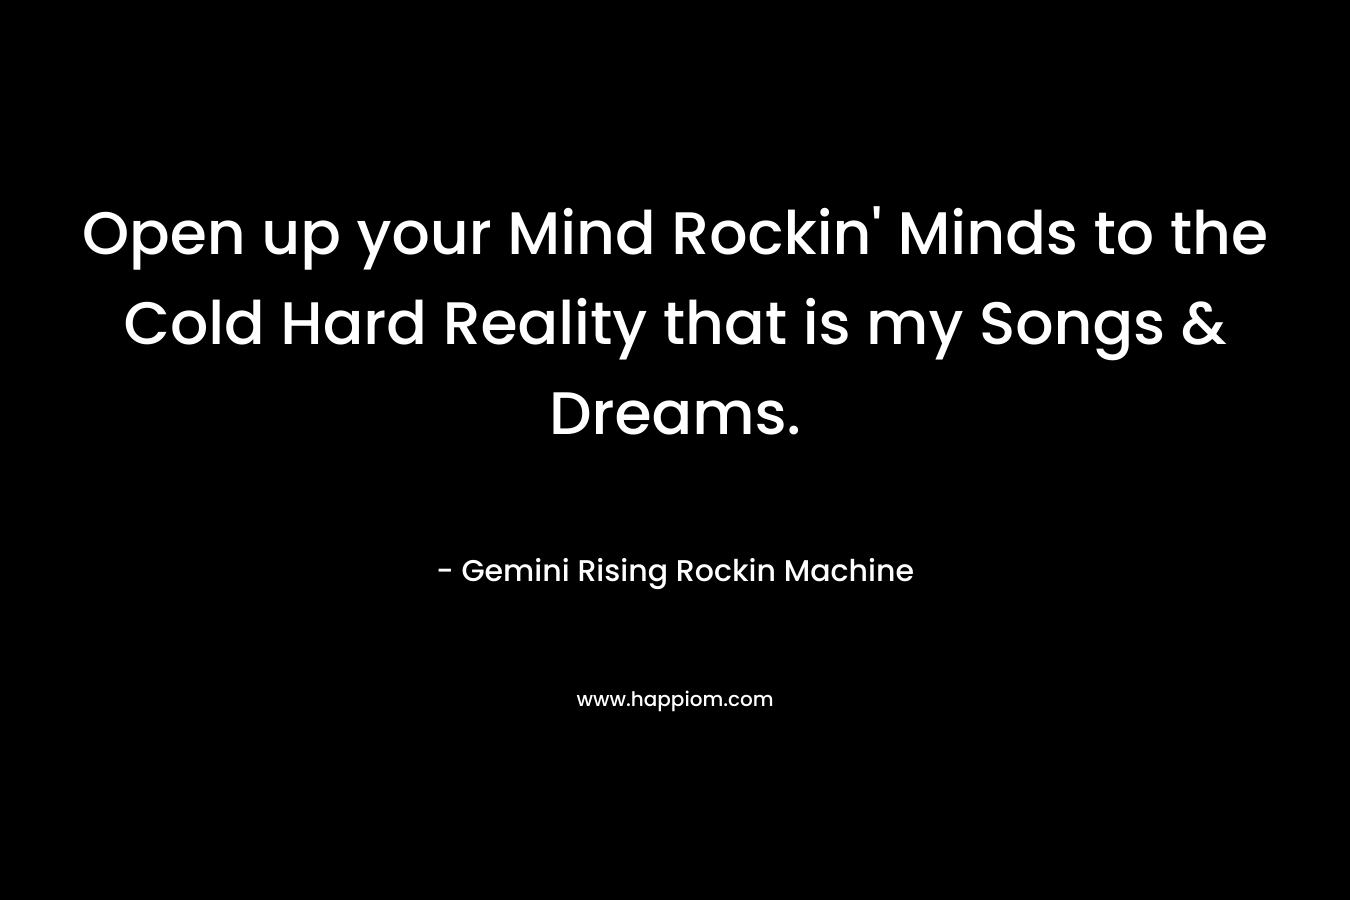 Open up your Mind Rockin’ Minds to the Cold Hard Reality that is my Songs & Dreams. – Gemini Rising Rockin Machine